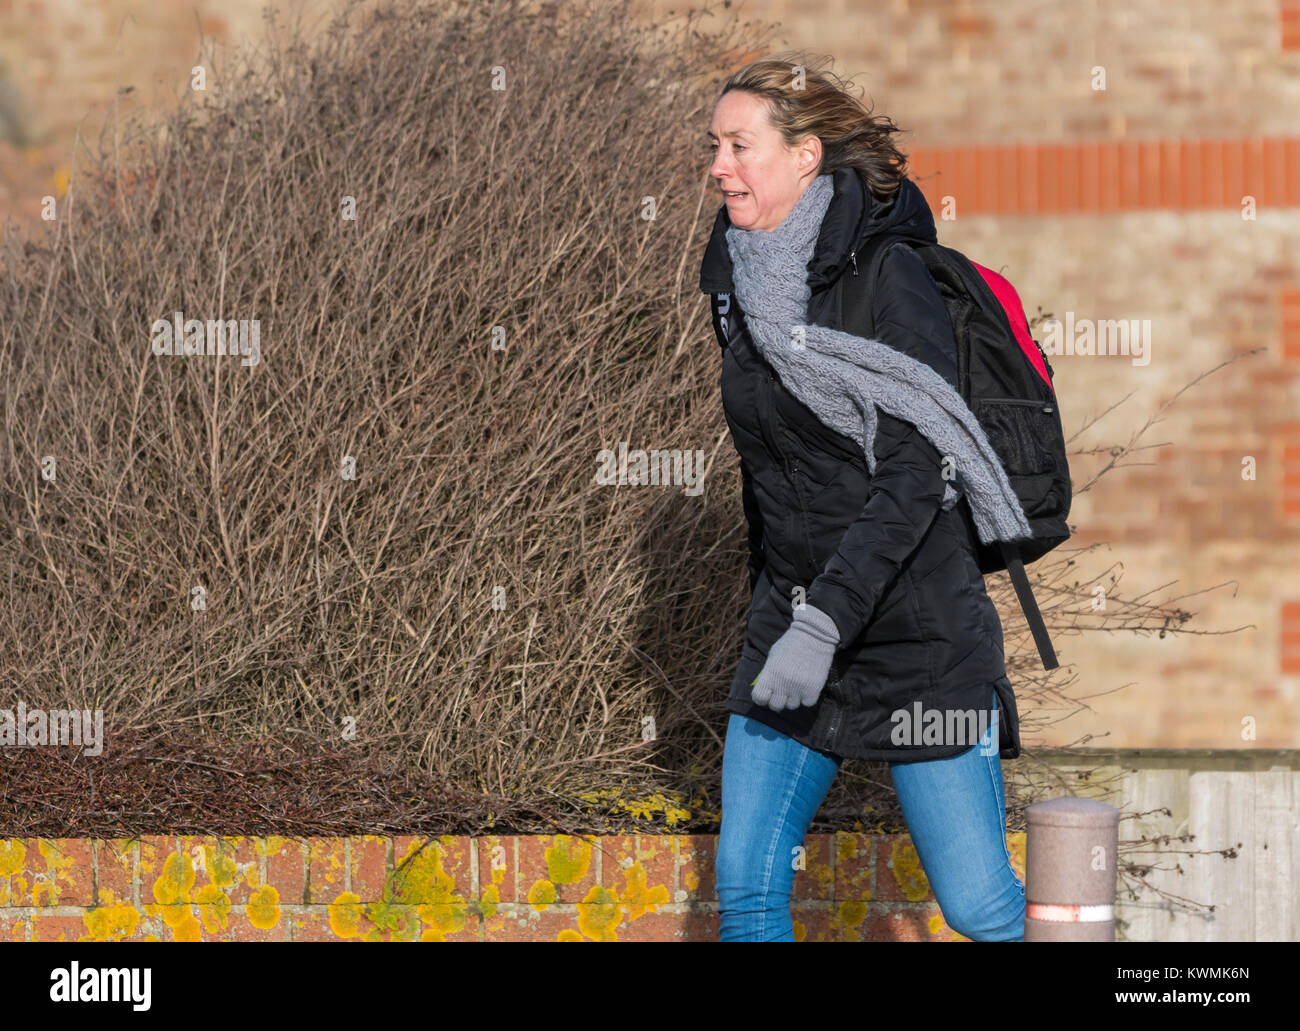 Woman walking into the wind wearing a coat and scarf in winter. Stock Photo